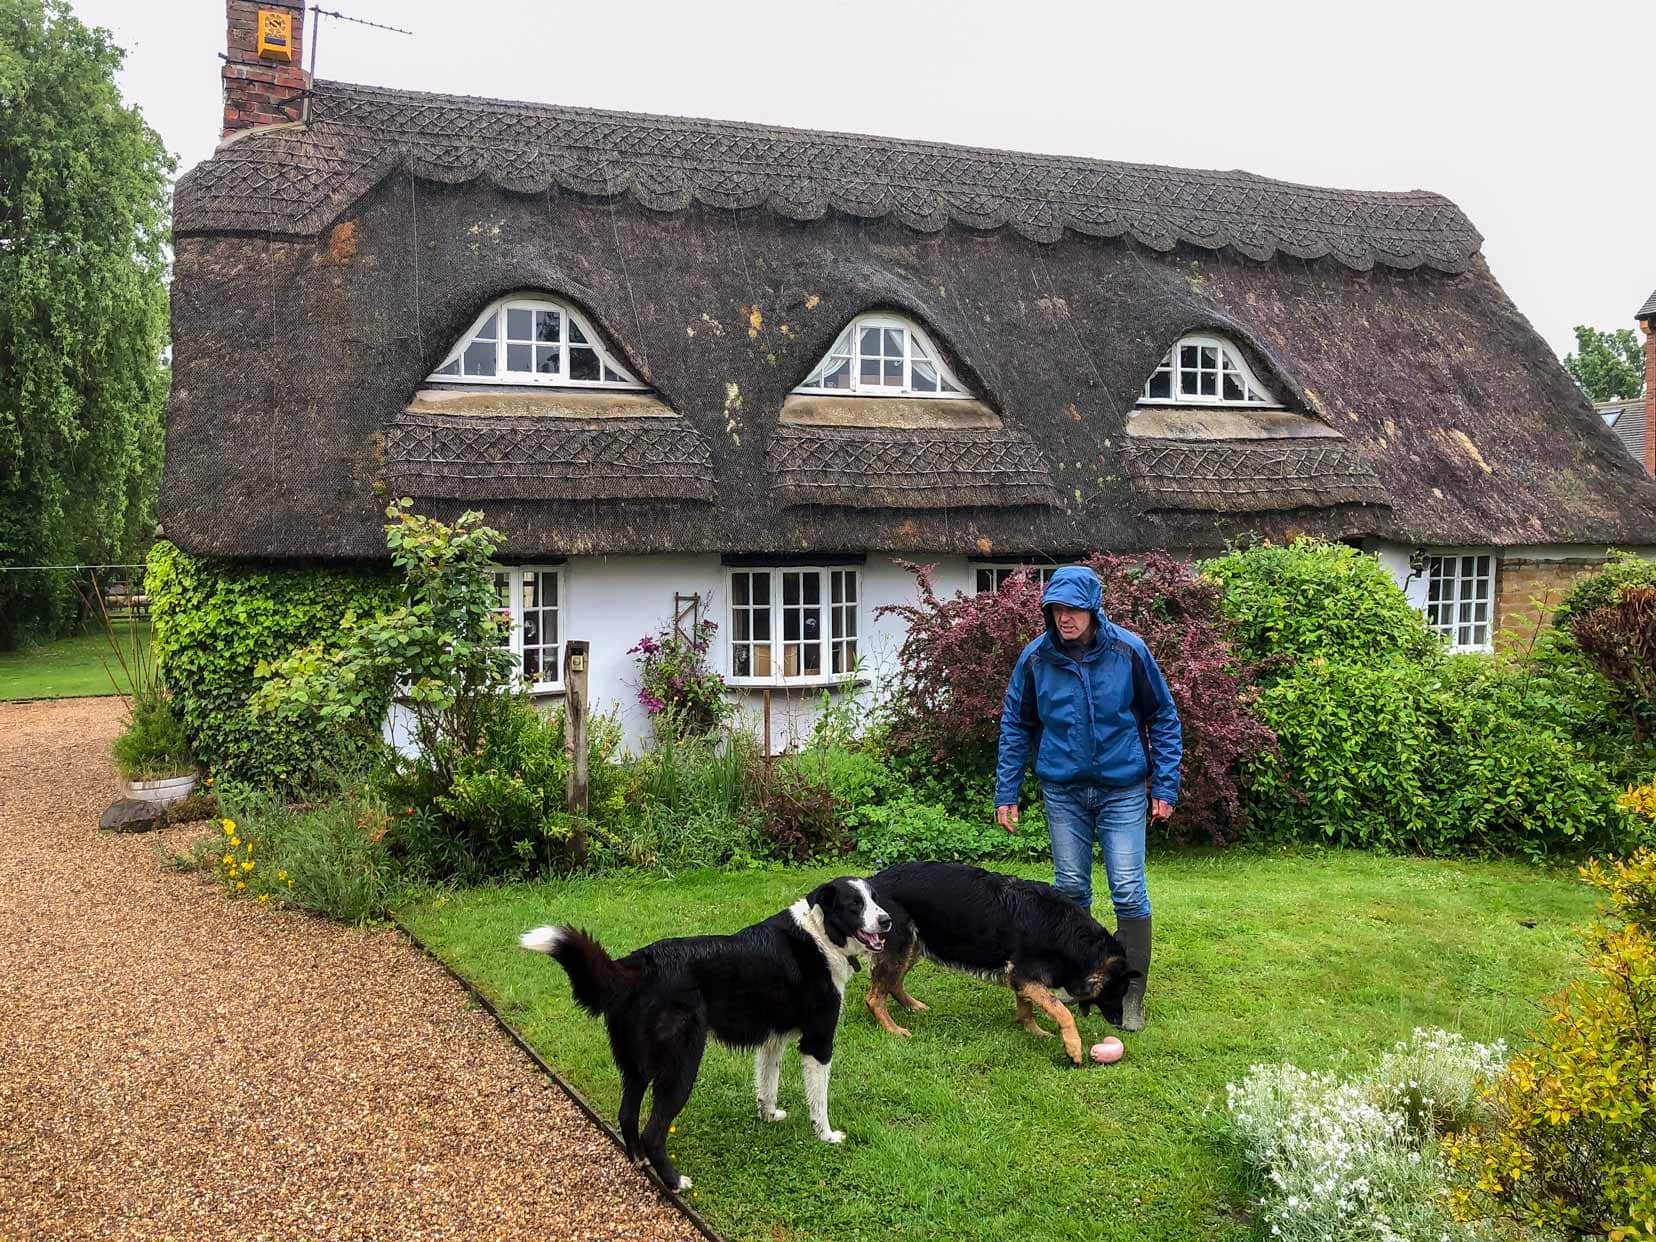 Exploring the cotswolds on a house sit in the uK - Lars stood in a graden with two dogs with the house we stayed in in the background with a beautiful shaped thatched roof